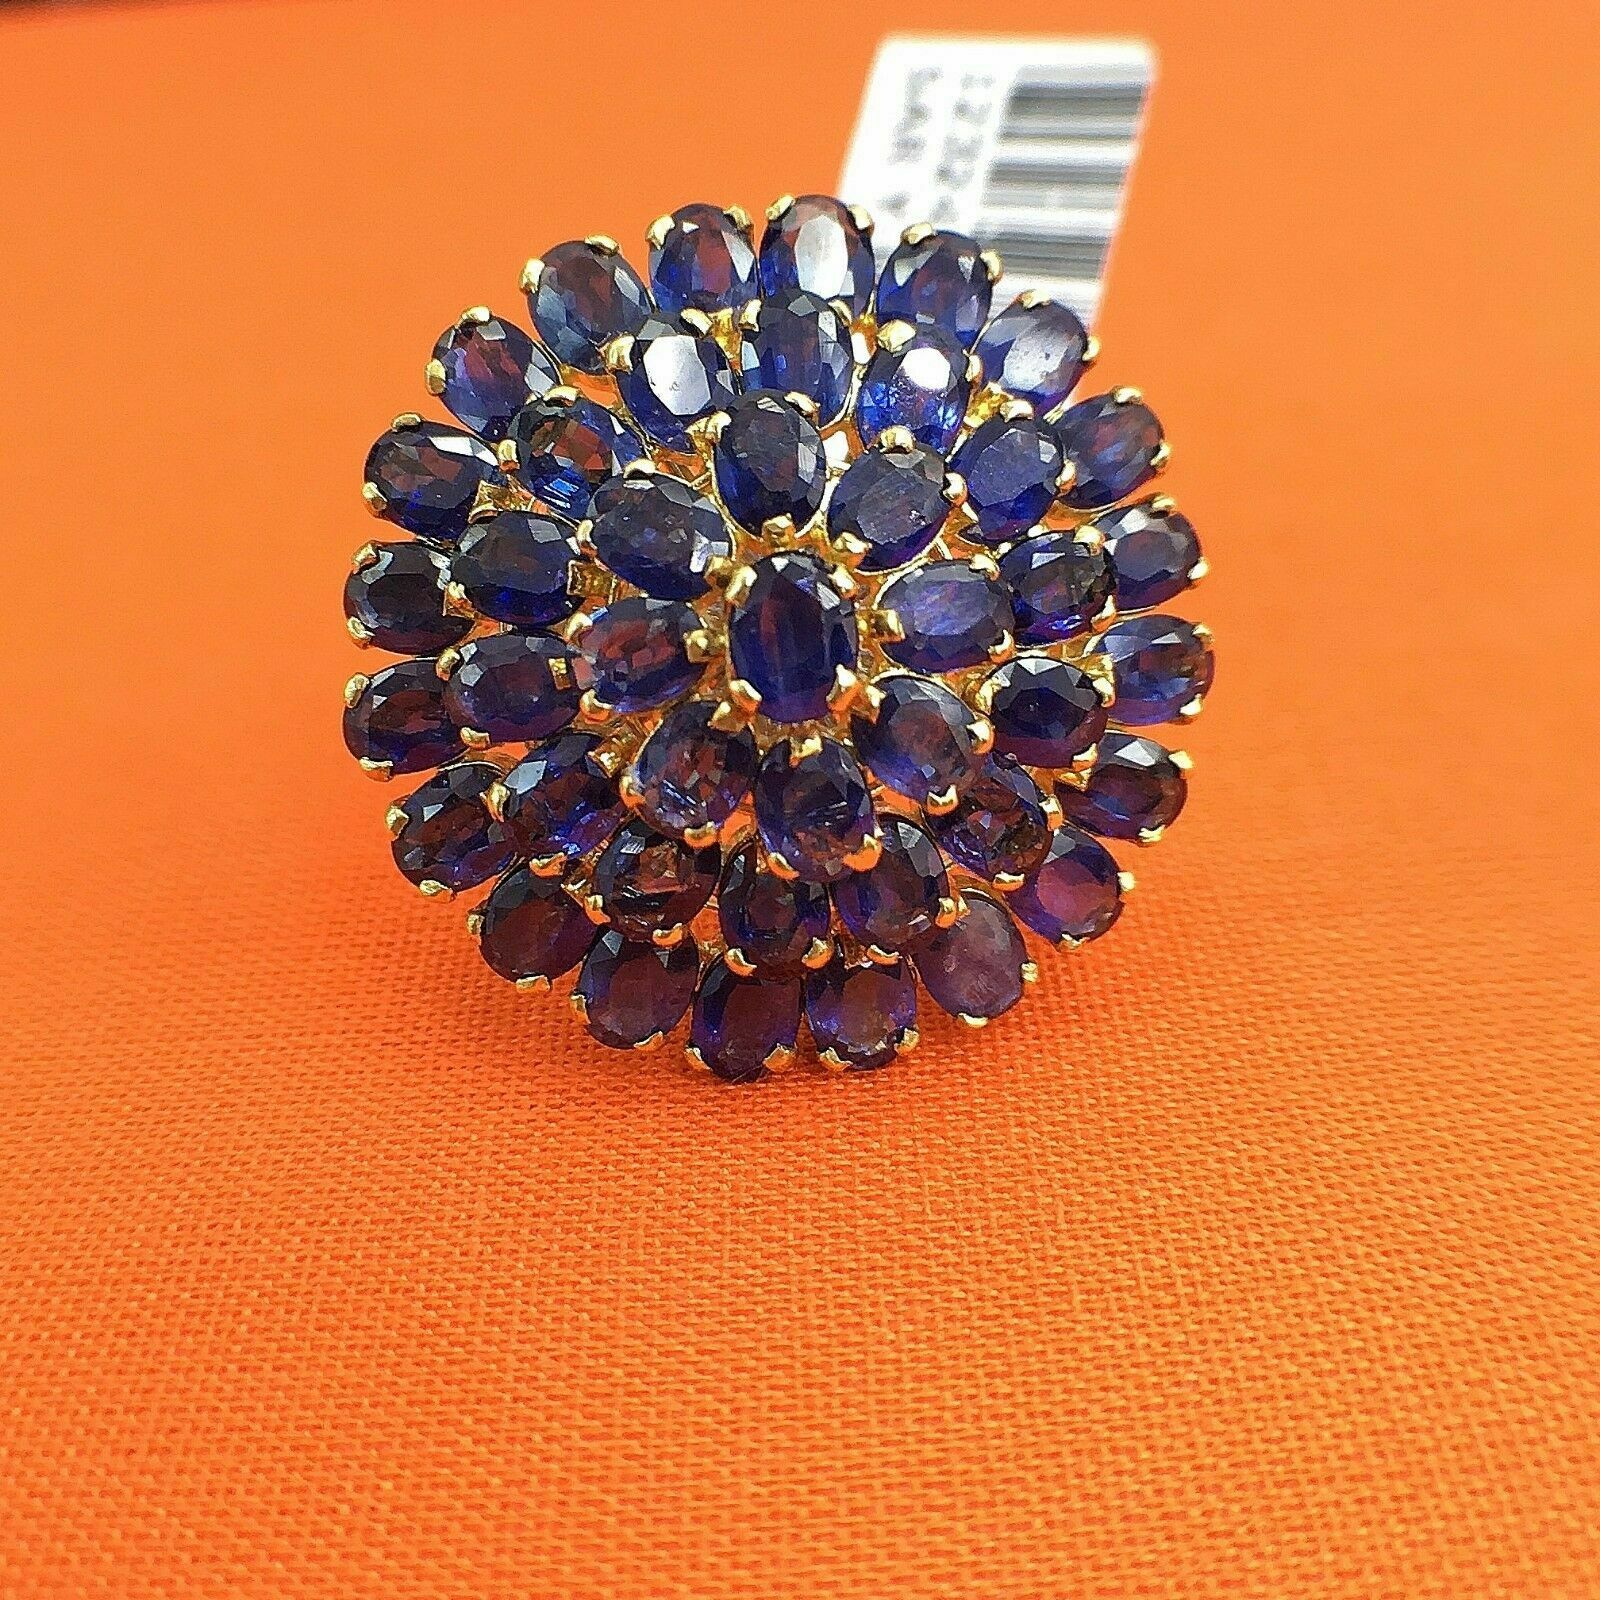 4.28 Carats t.w. Sapphire Cocktail/Dinner Ring 14K Gold 1 Inch Diameter